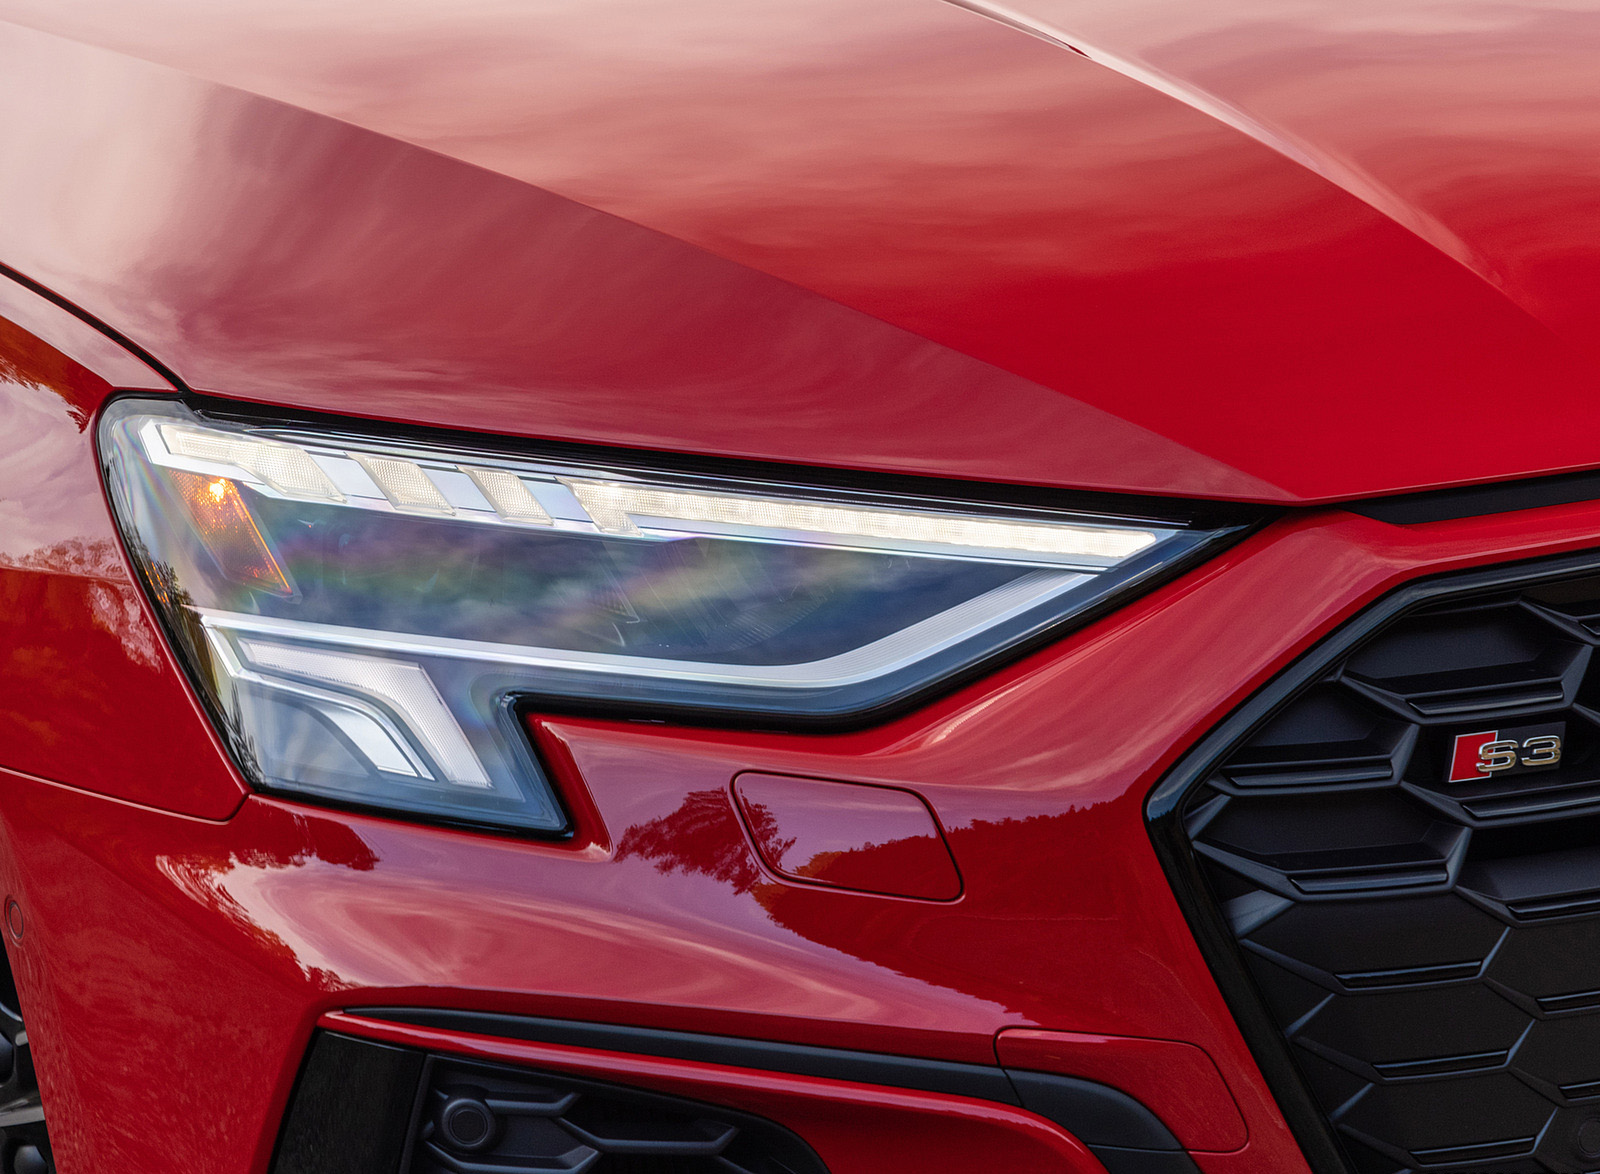 2022 Audi S3 (Color: Tango Red; US-Spec) Headlight Wallpapers  #31 of 90